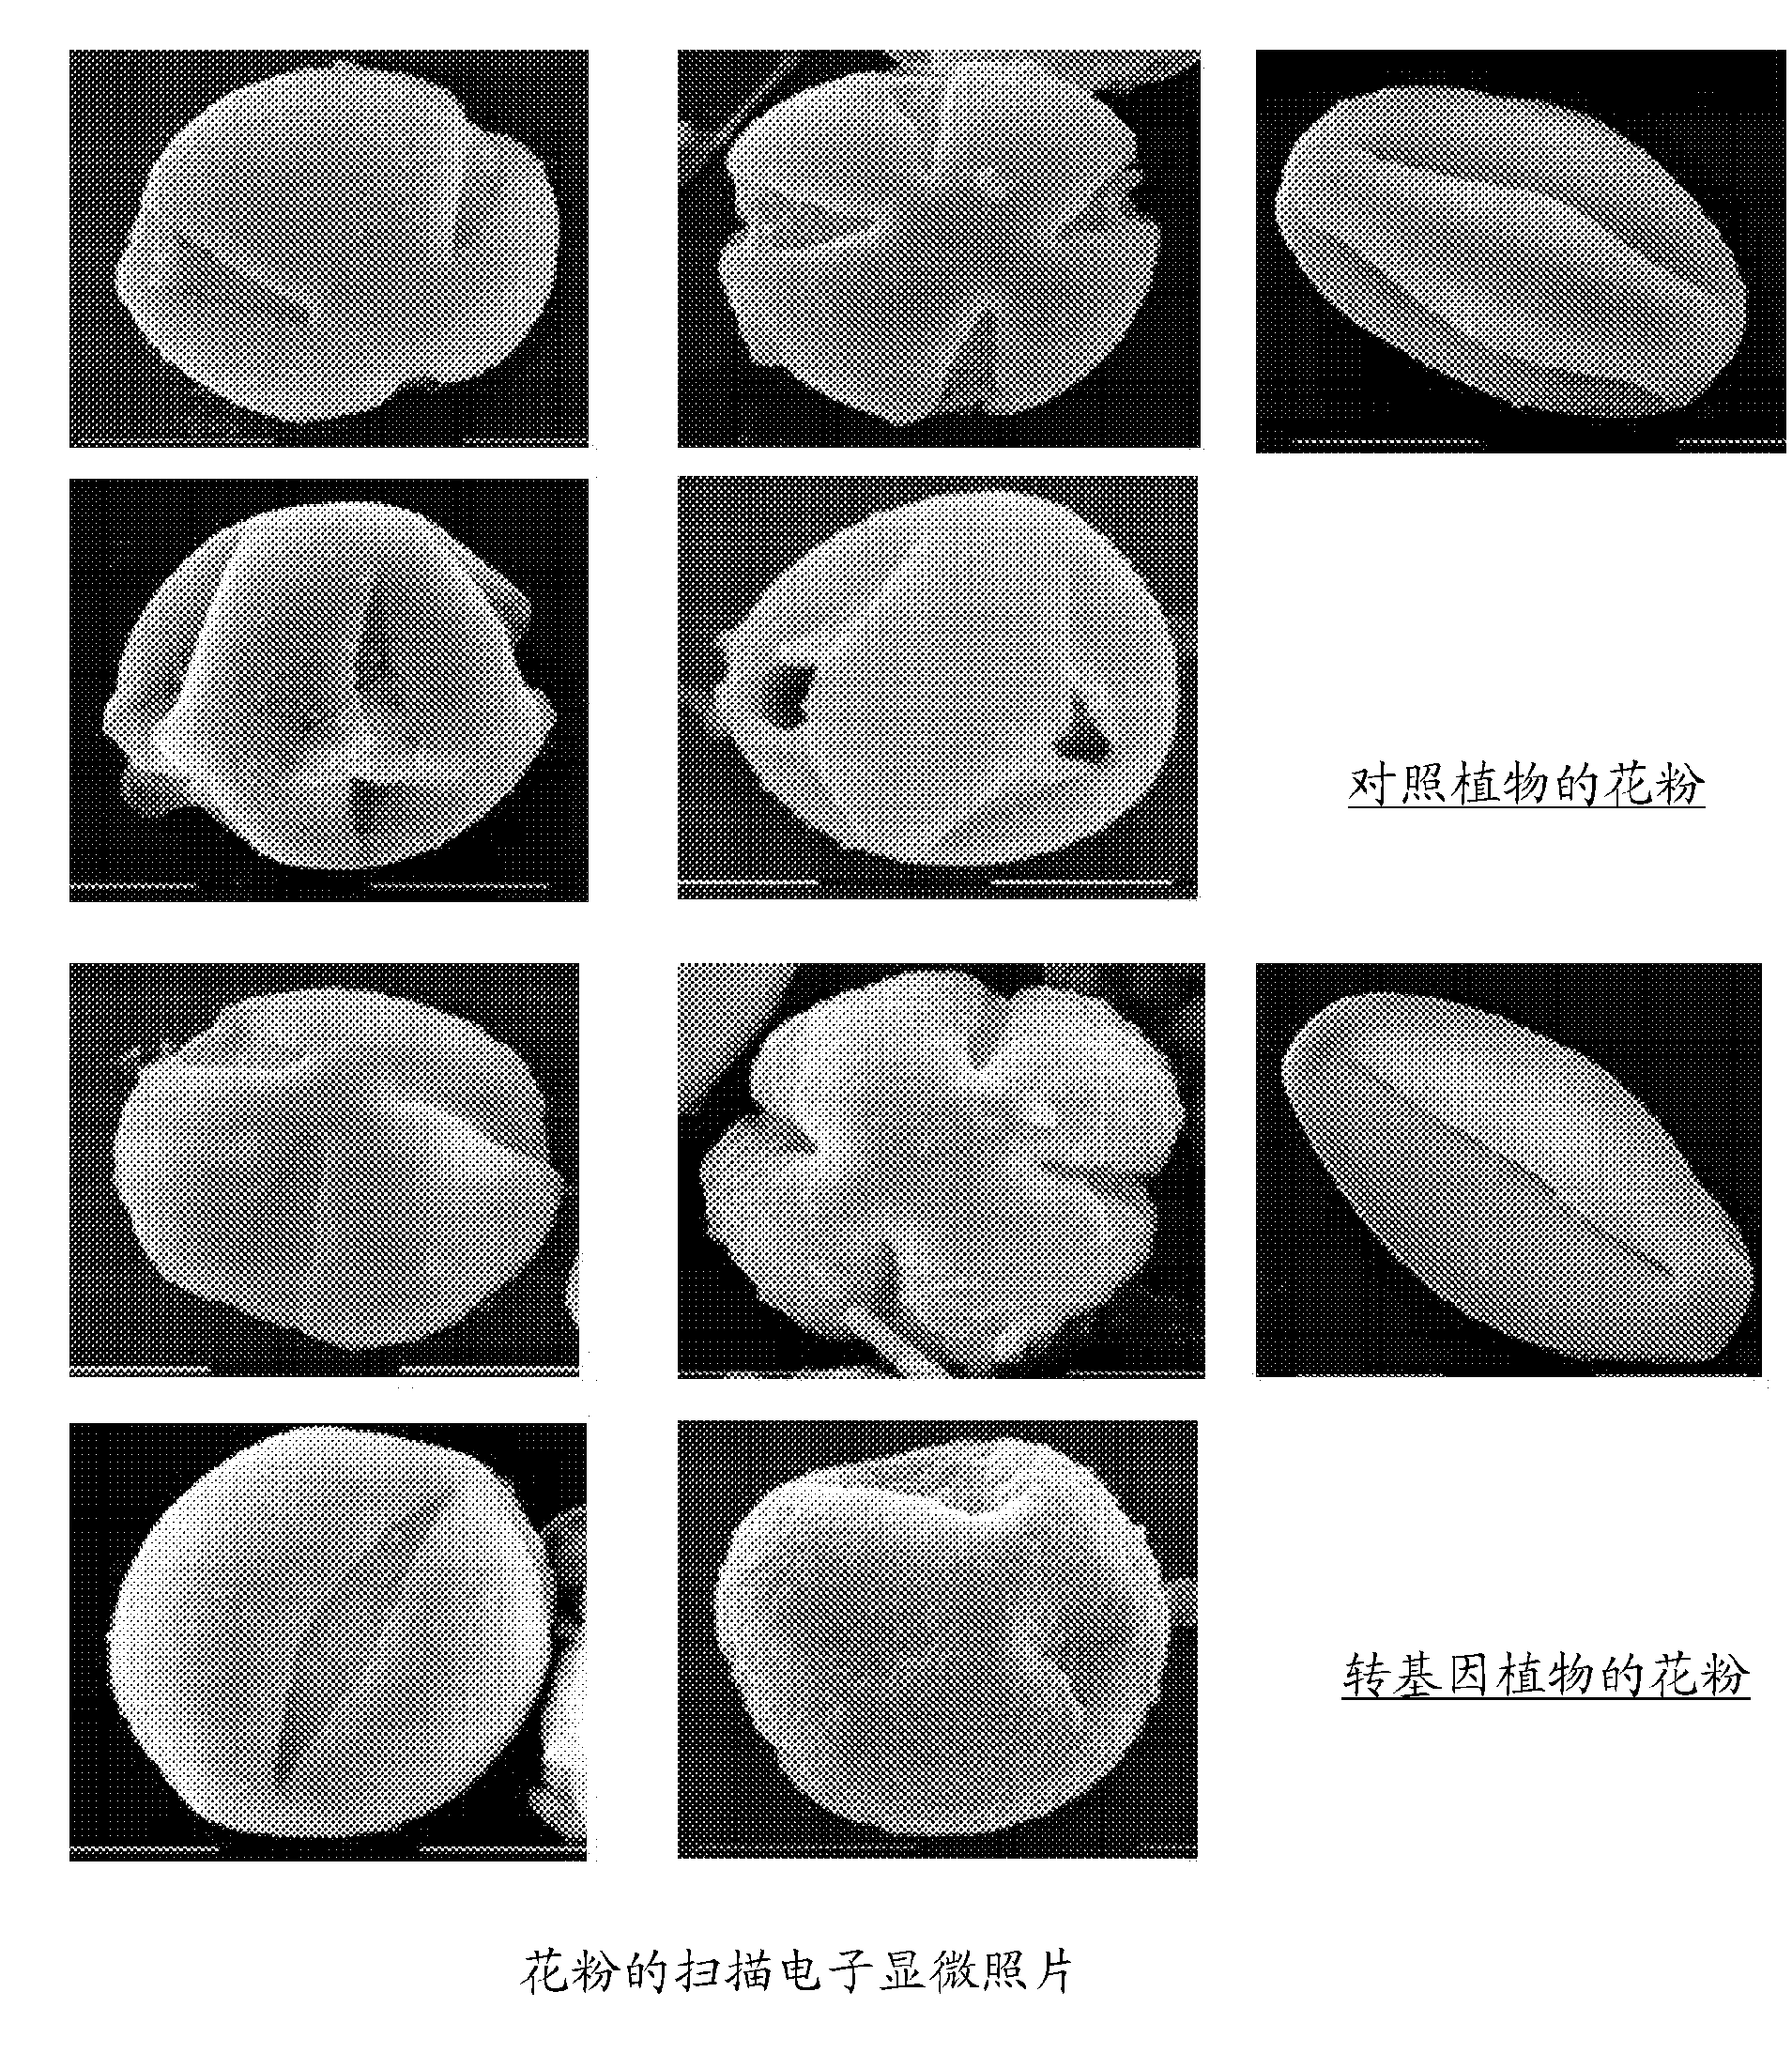 Method for producing male sterile plants